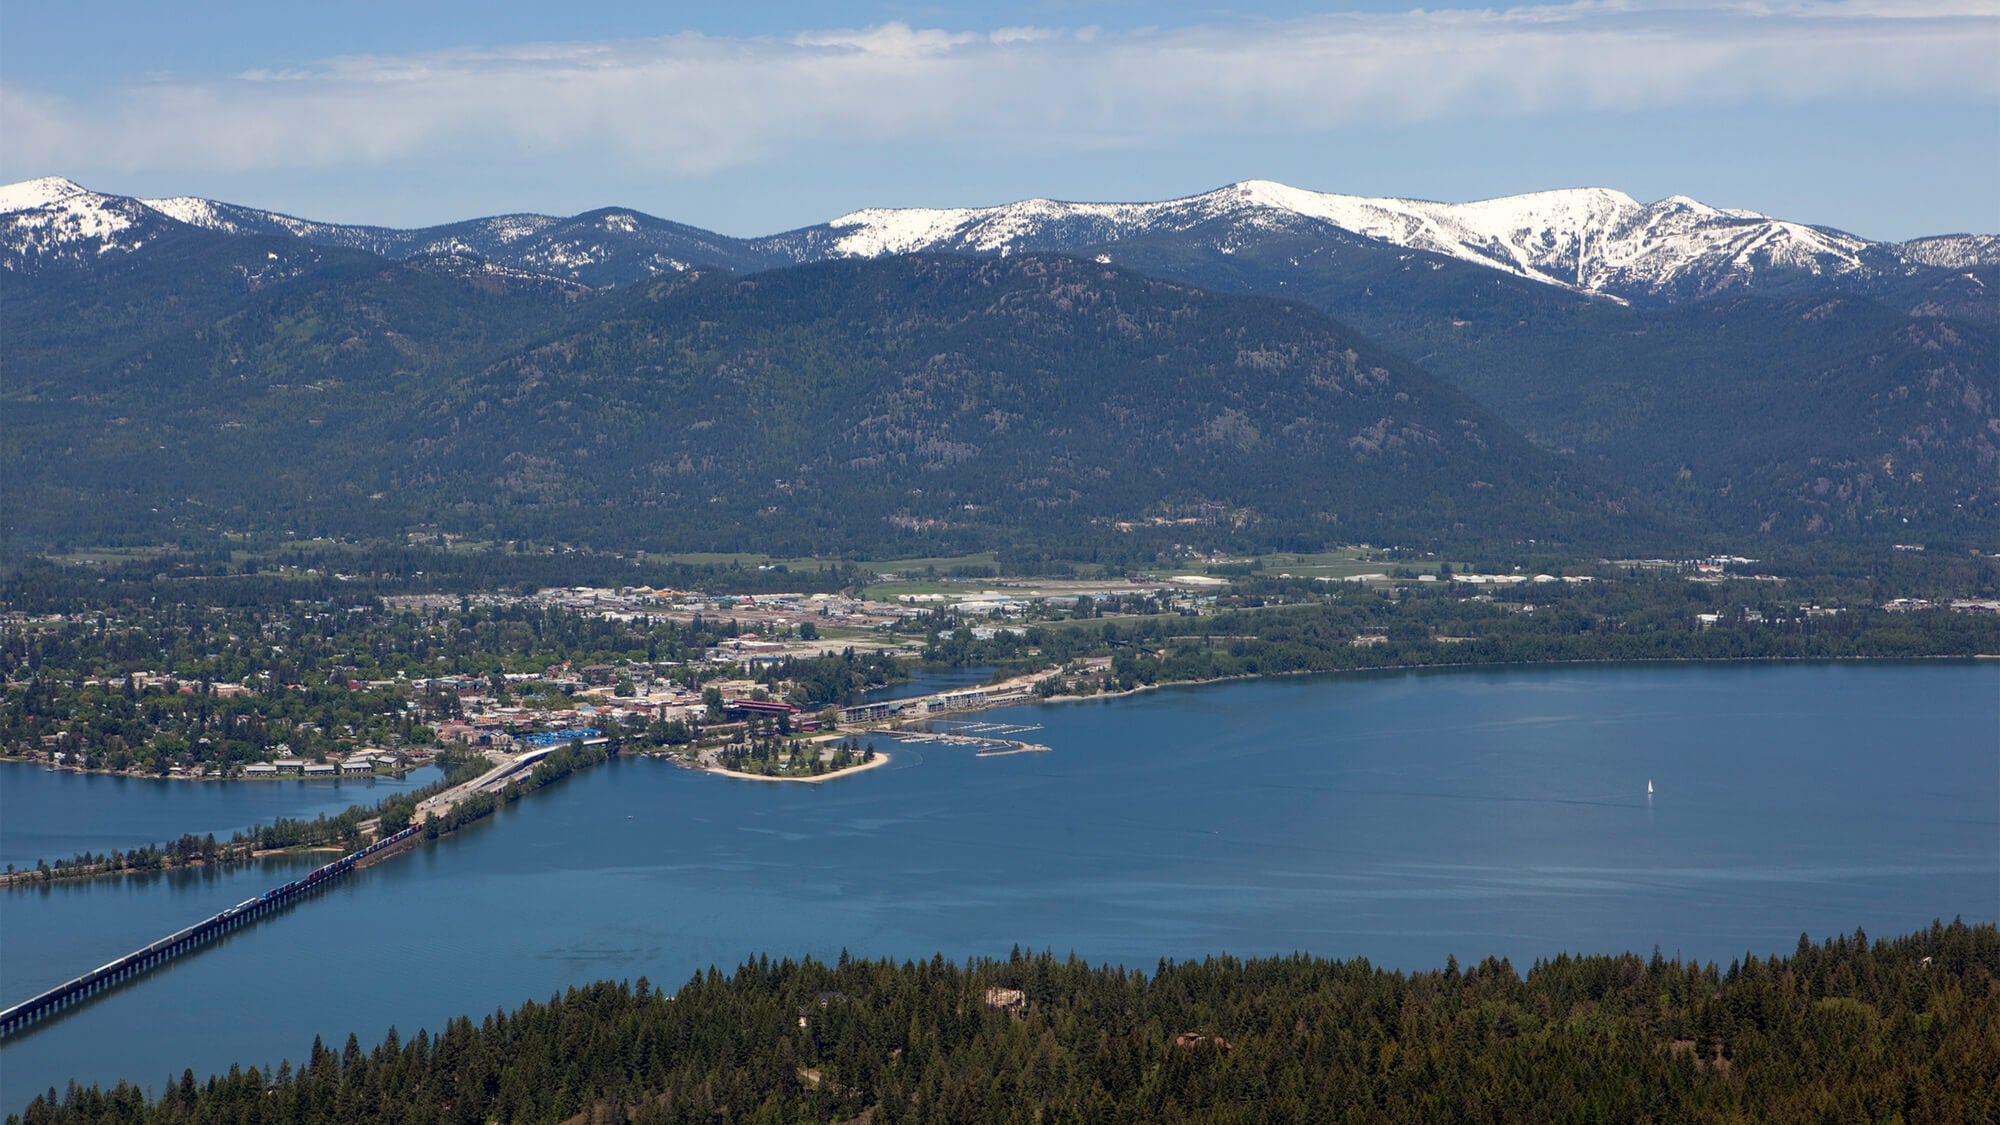 Sandpoint and Lake Pend Oreille from afar